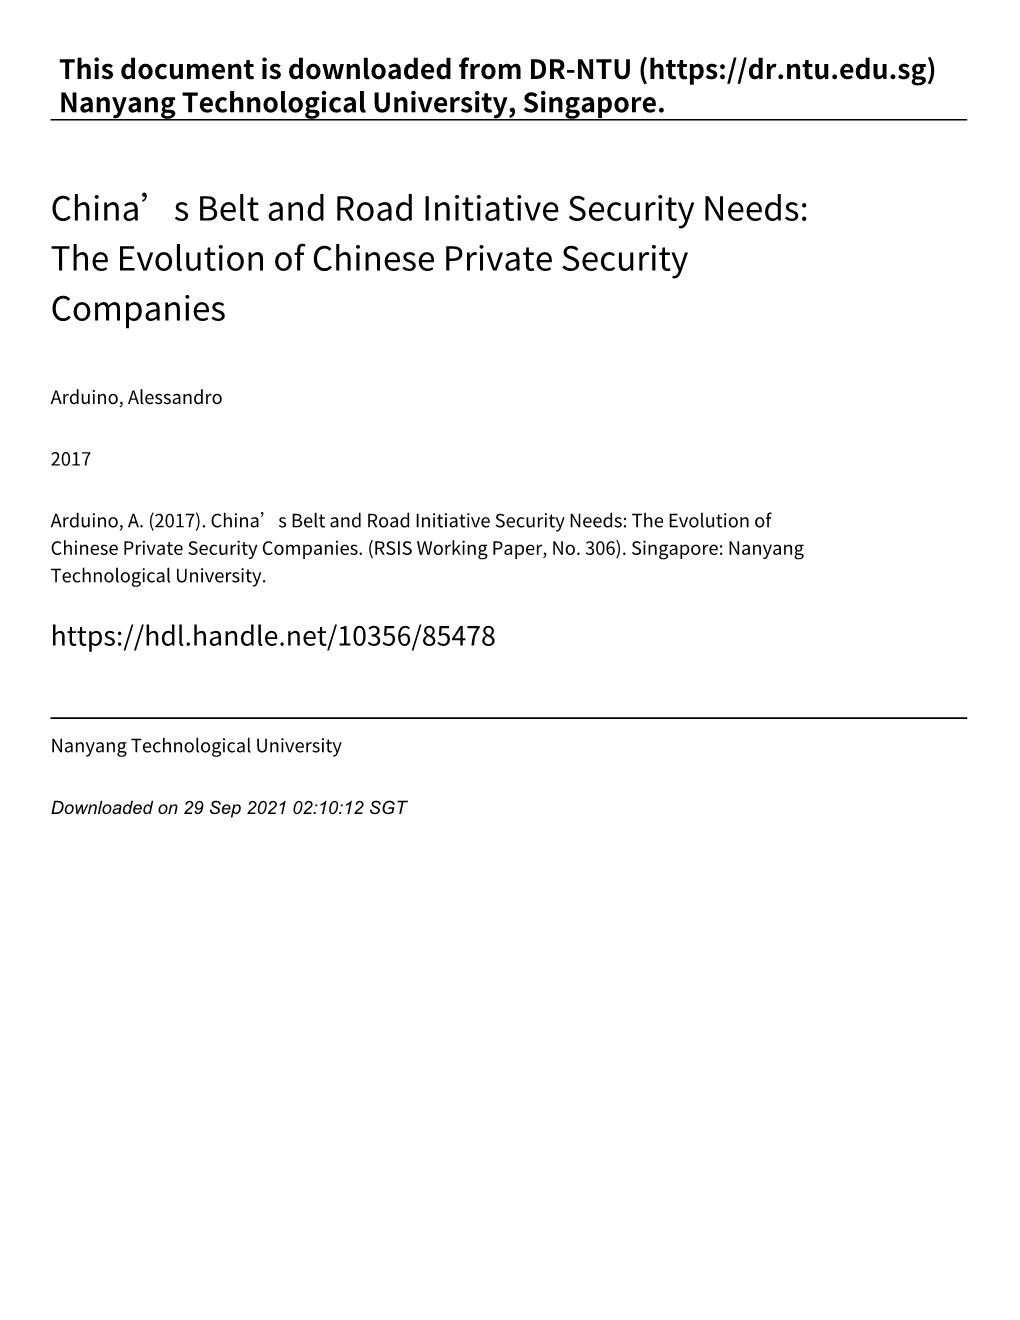 The Evolution of Chinese Private Security Companies